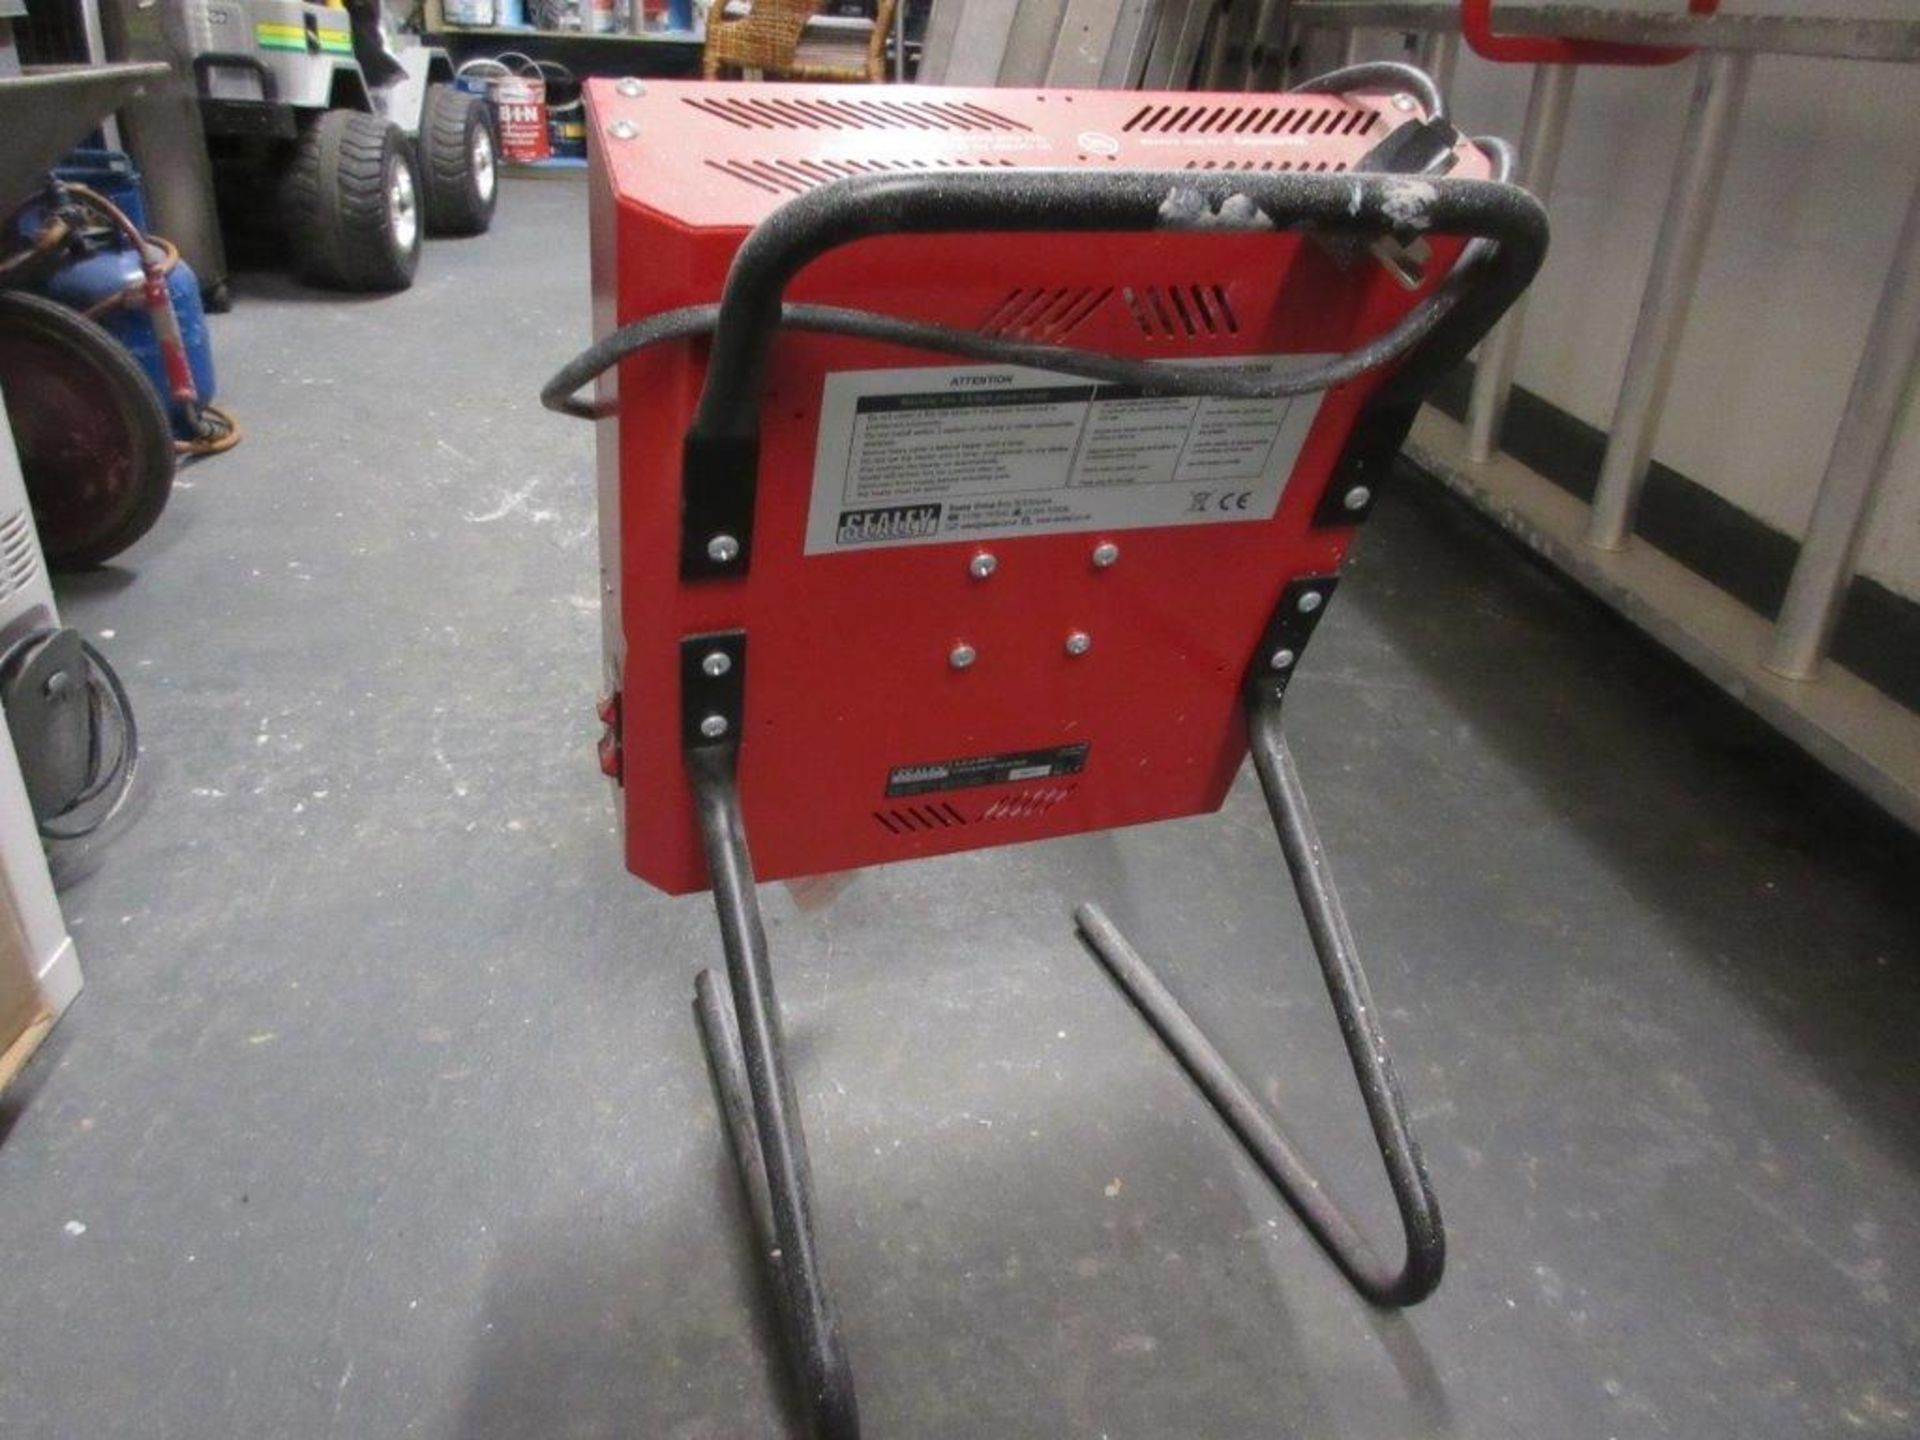 Sealey CH2800 electric ceramic heater - floorstanding - Image 2 of 2